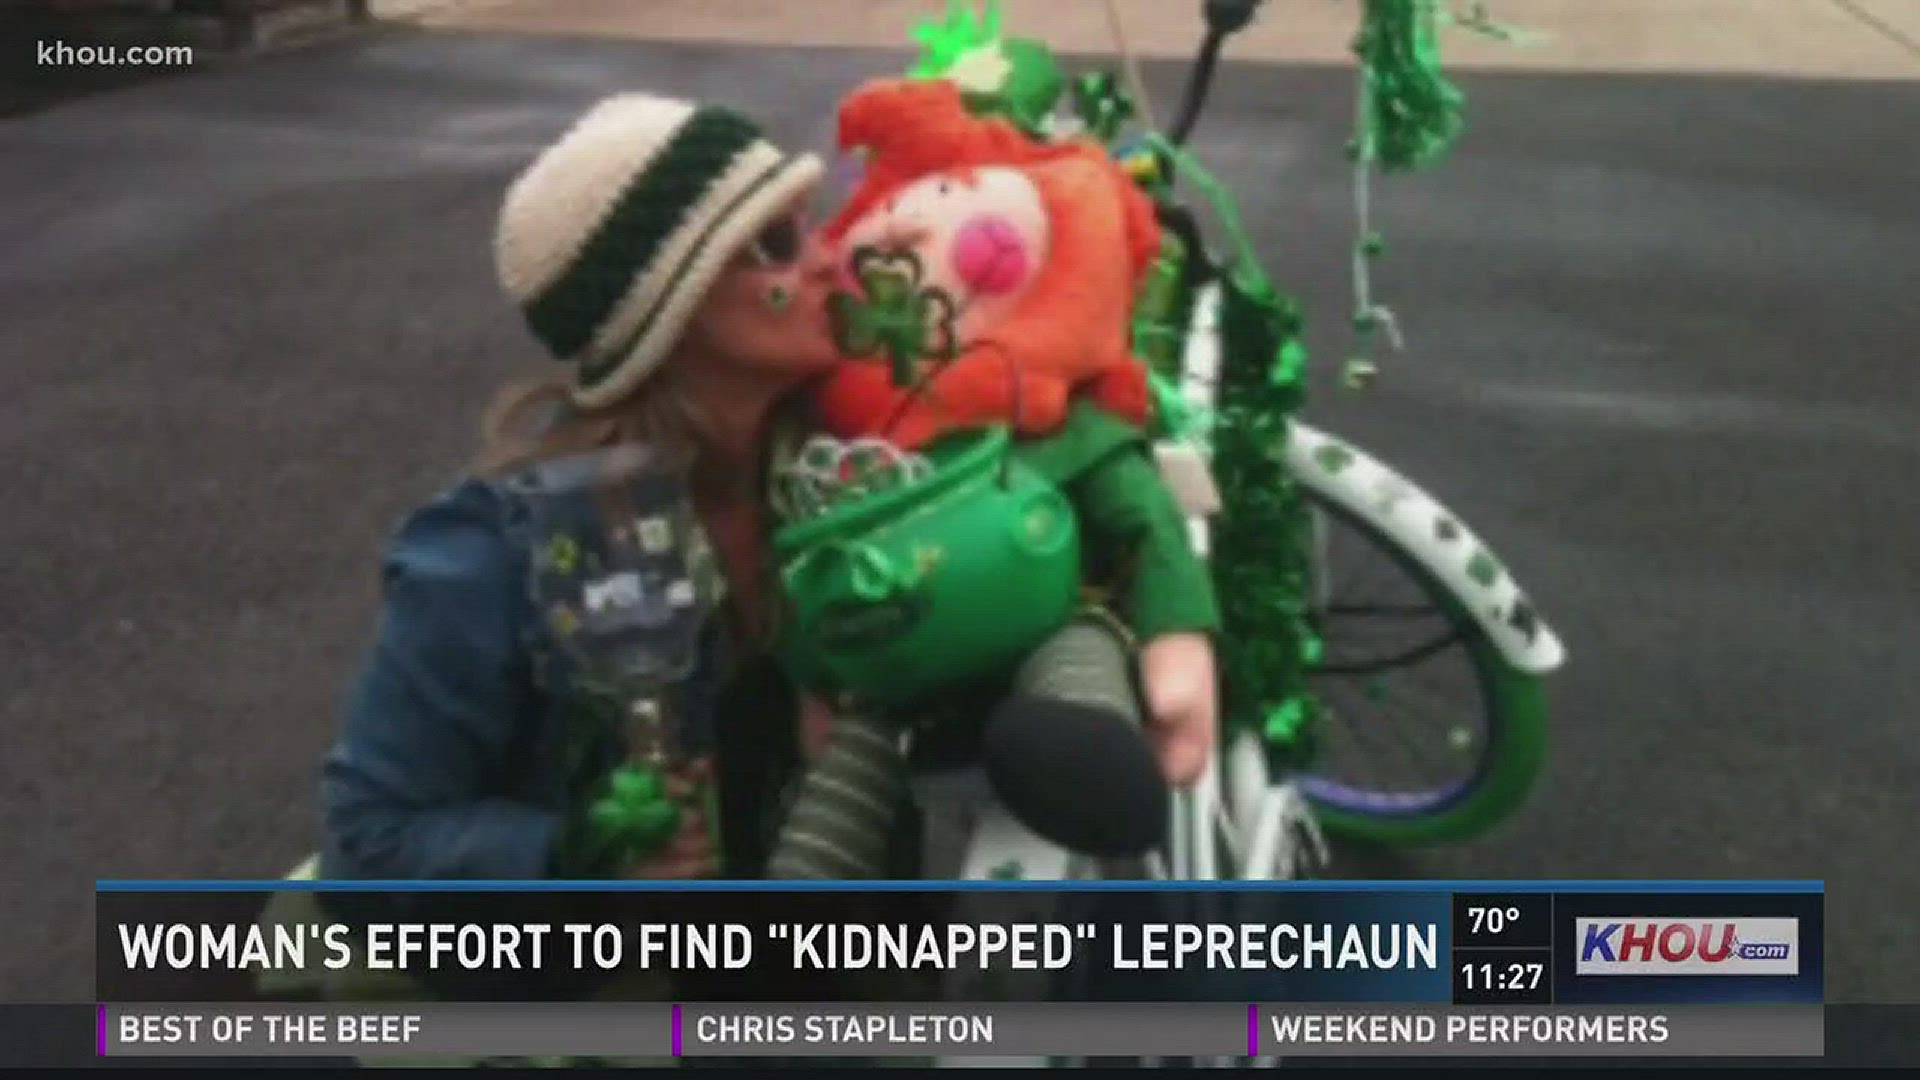 Charla Sisk designed her leprechaun and sewed him by hand while her father battled cancer. It was her way of coping with the loss of her father.